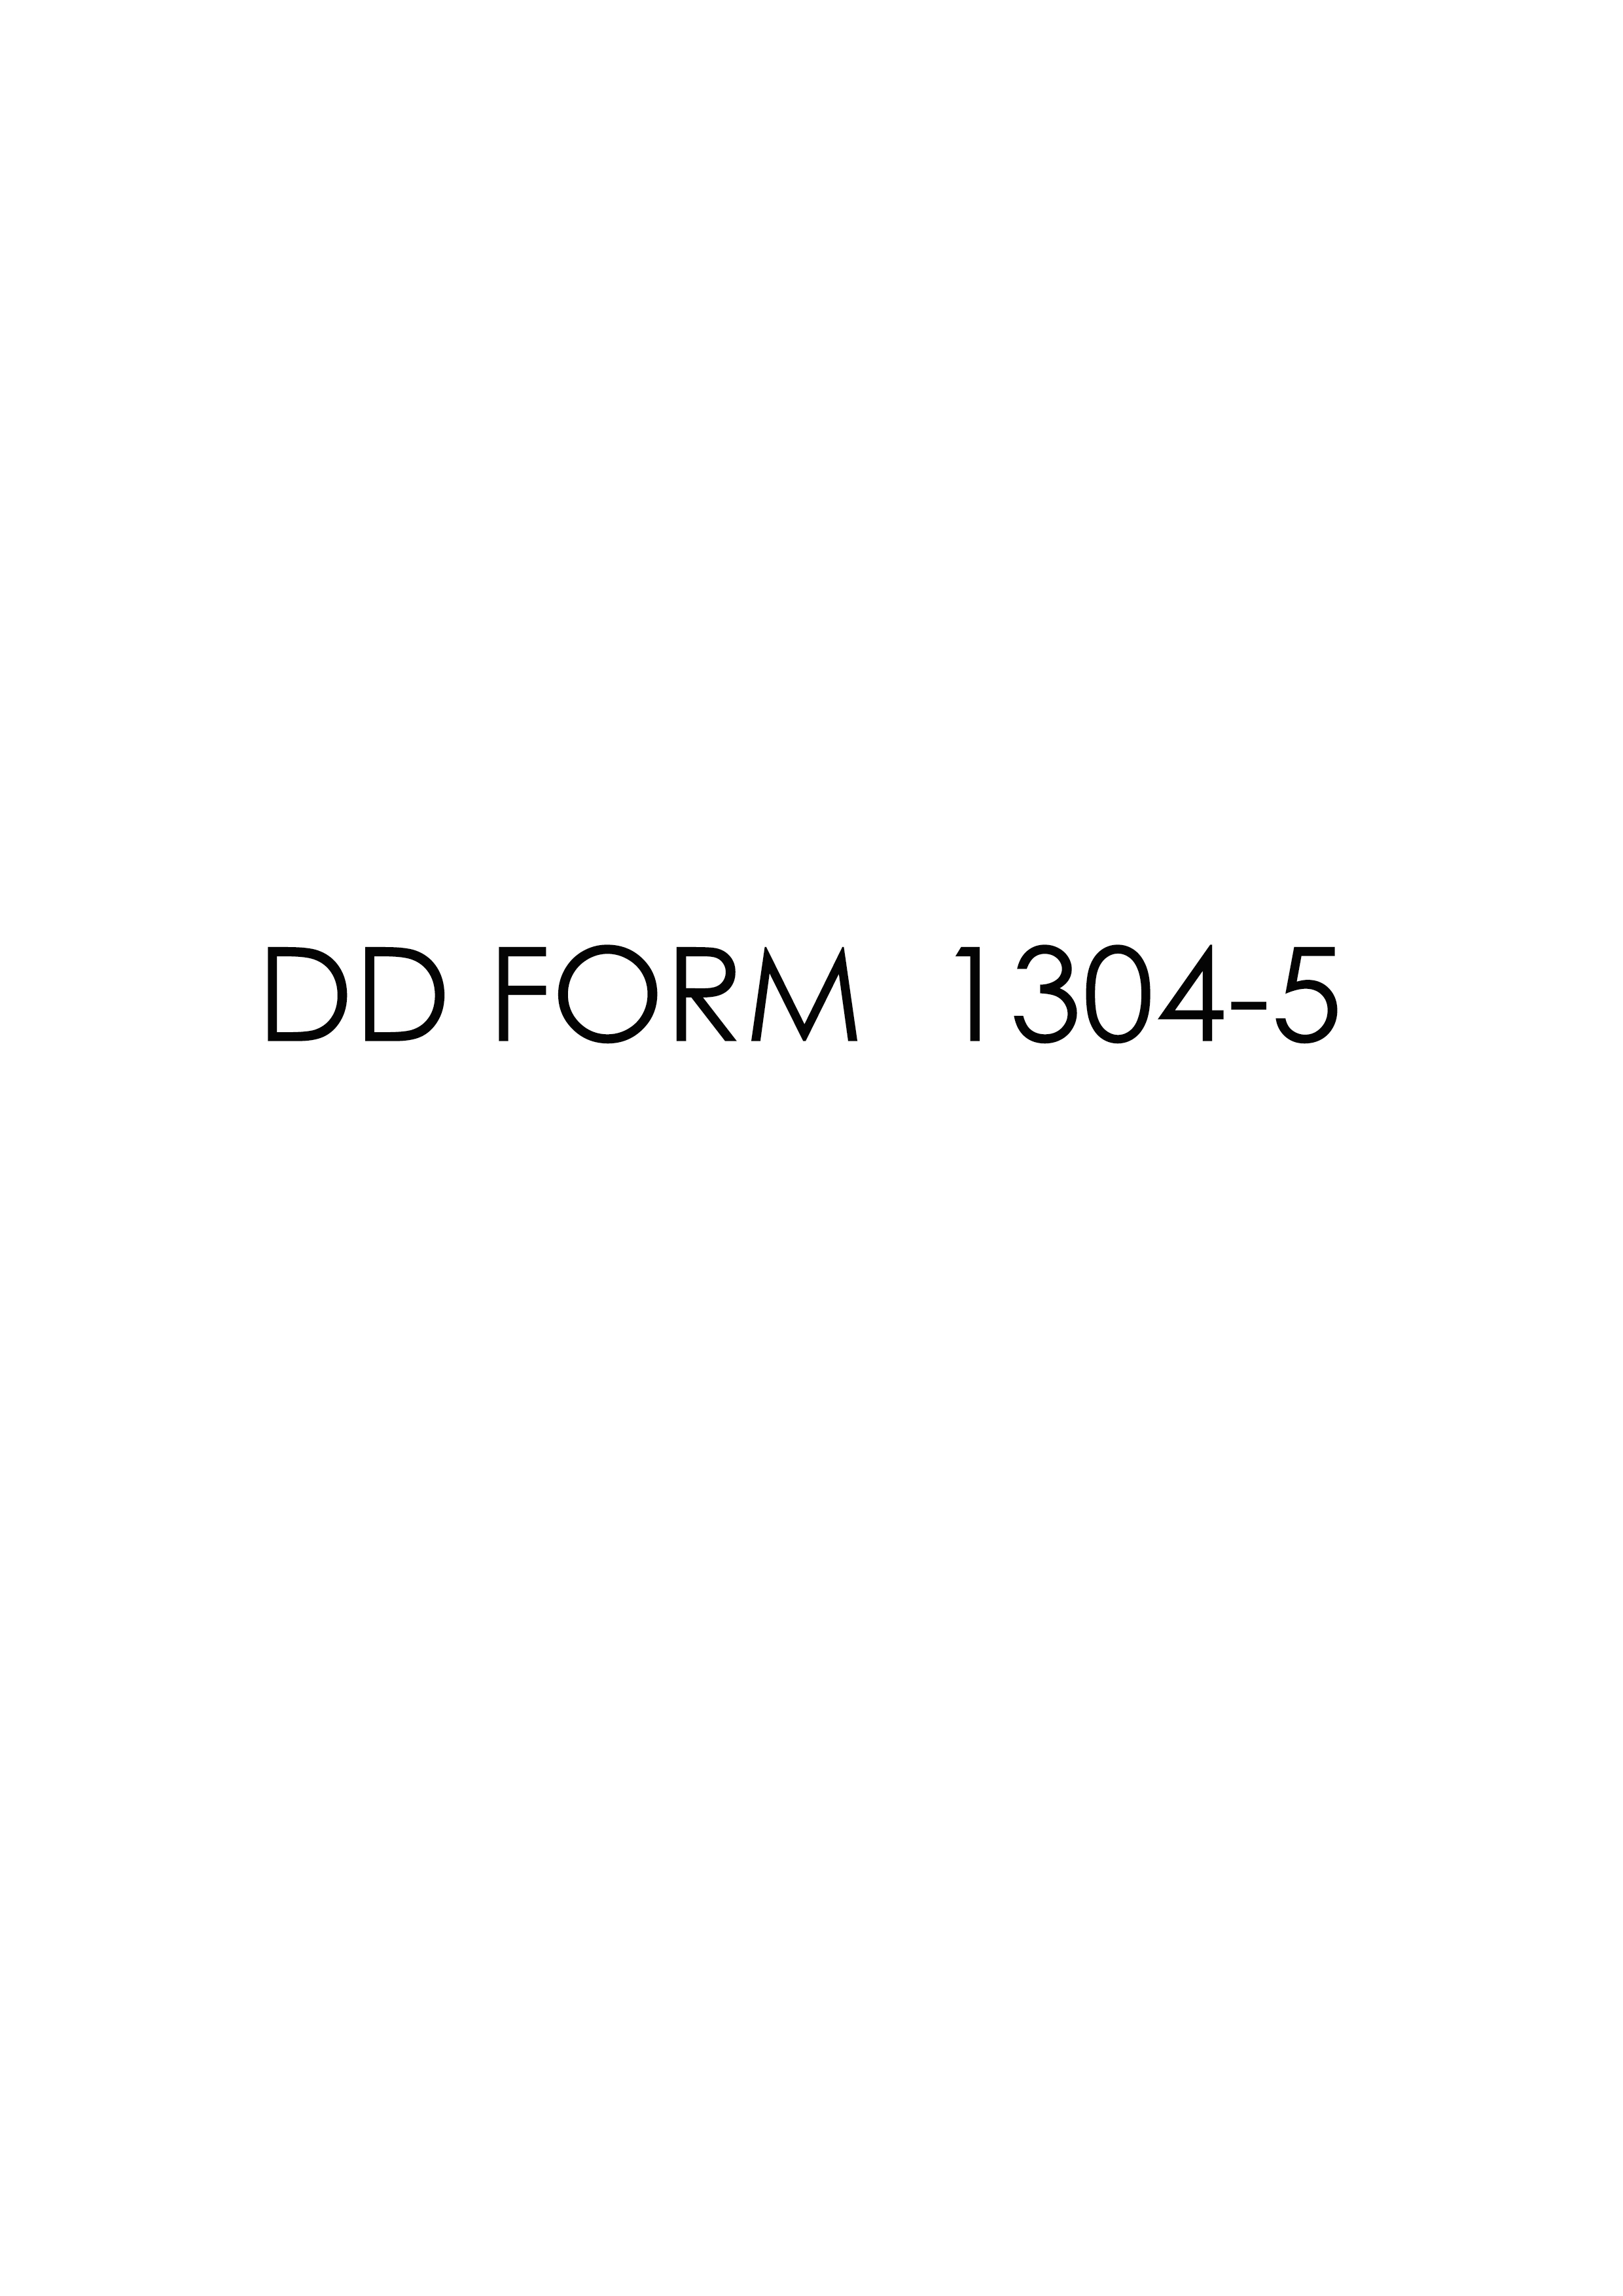 dd Form 1304-5 fillable